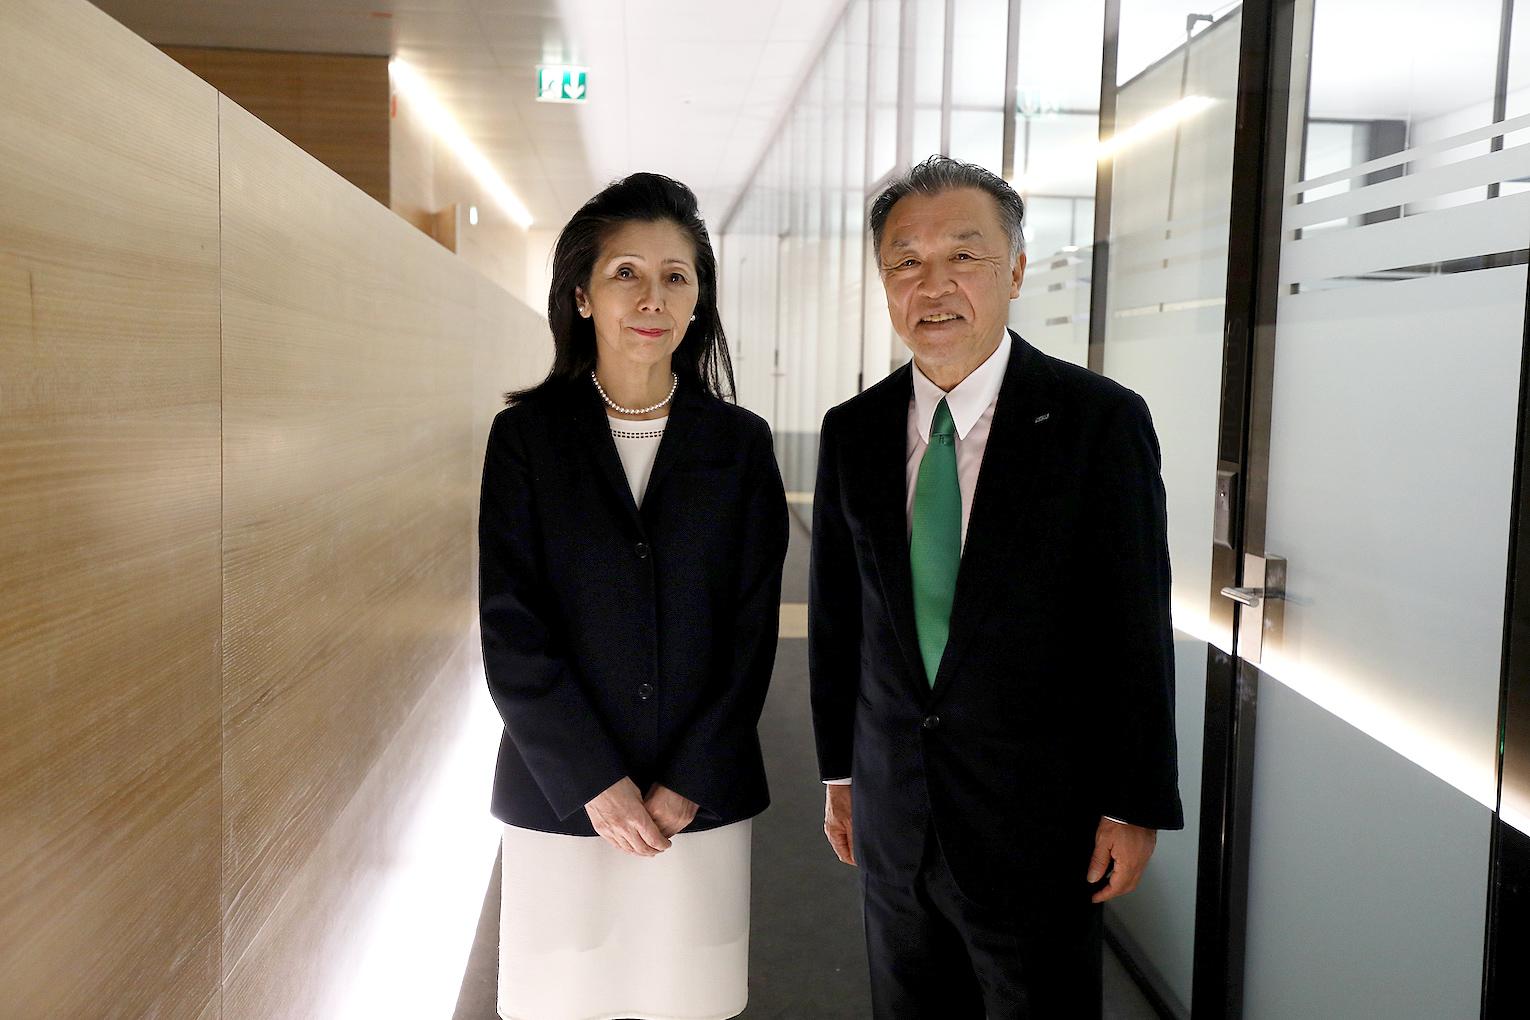 Mr and Mrs Nakao photographed in a modern corridor